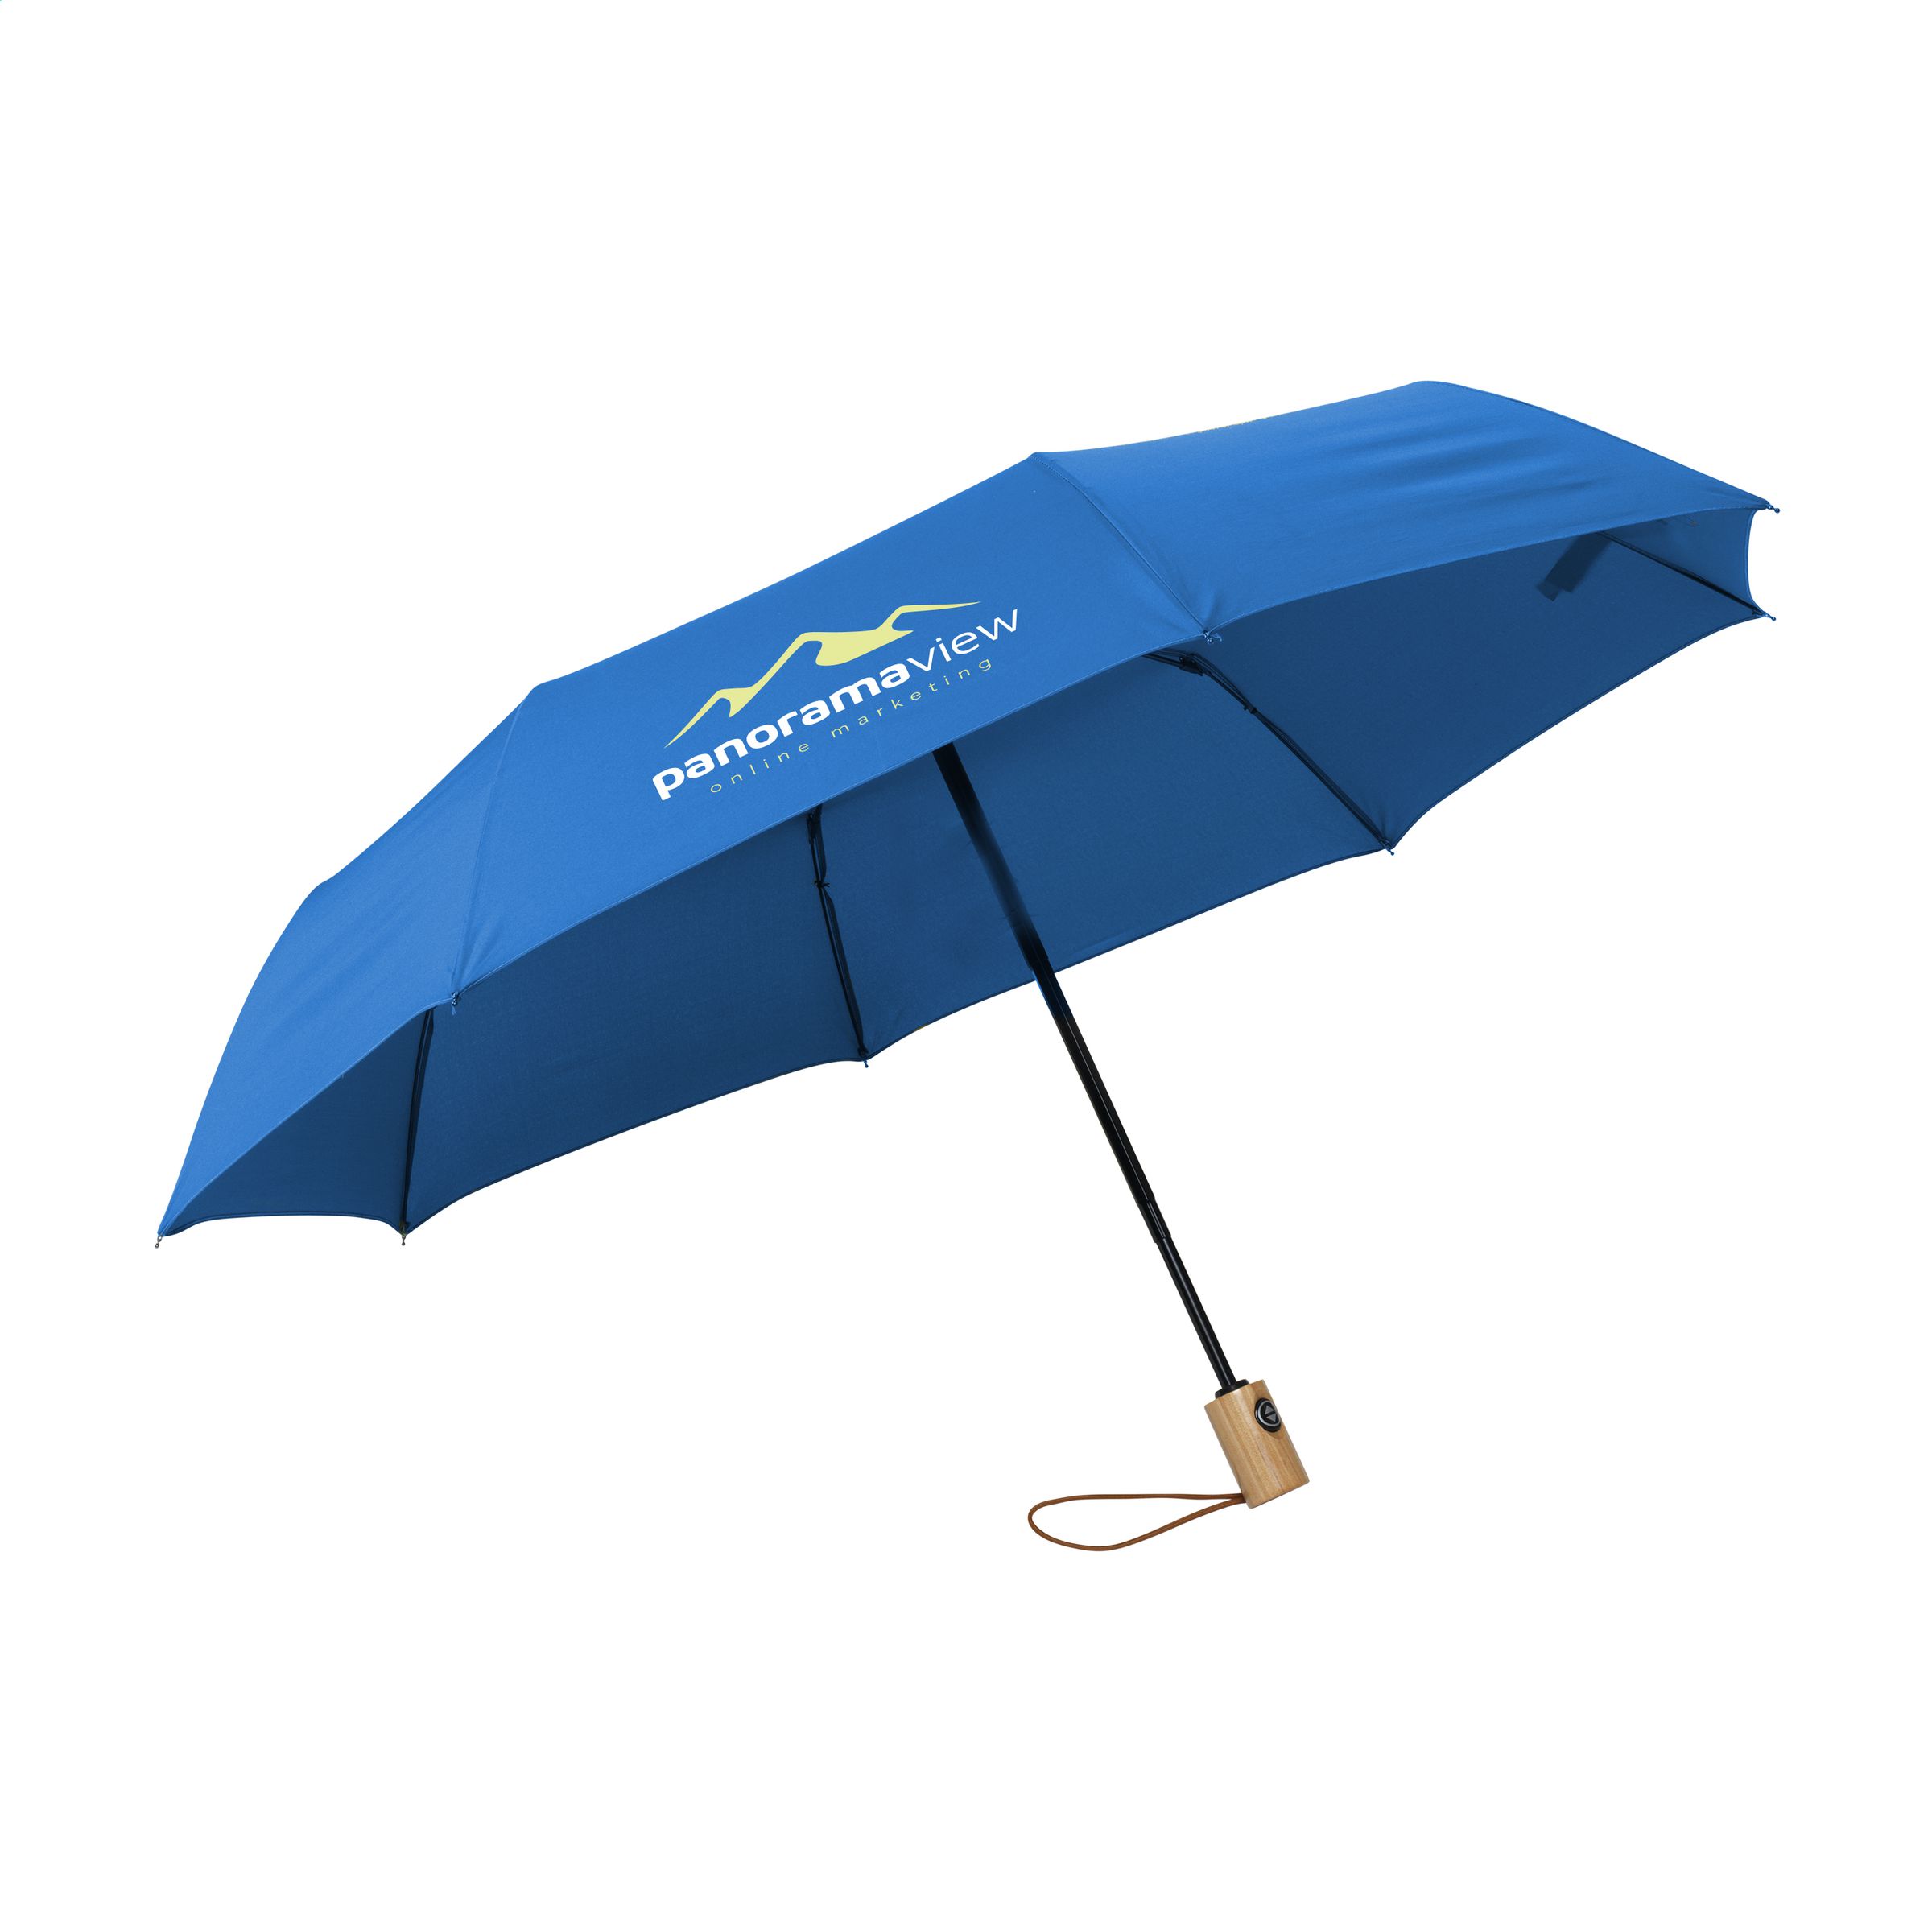 A folding umbrella named Aldwark that comes with an automatic system for opening and closing. - Sleat